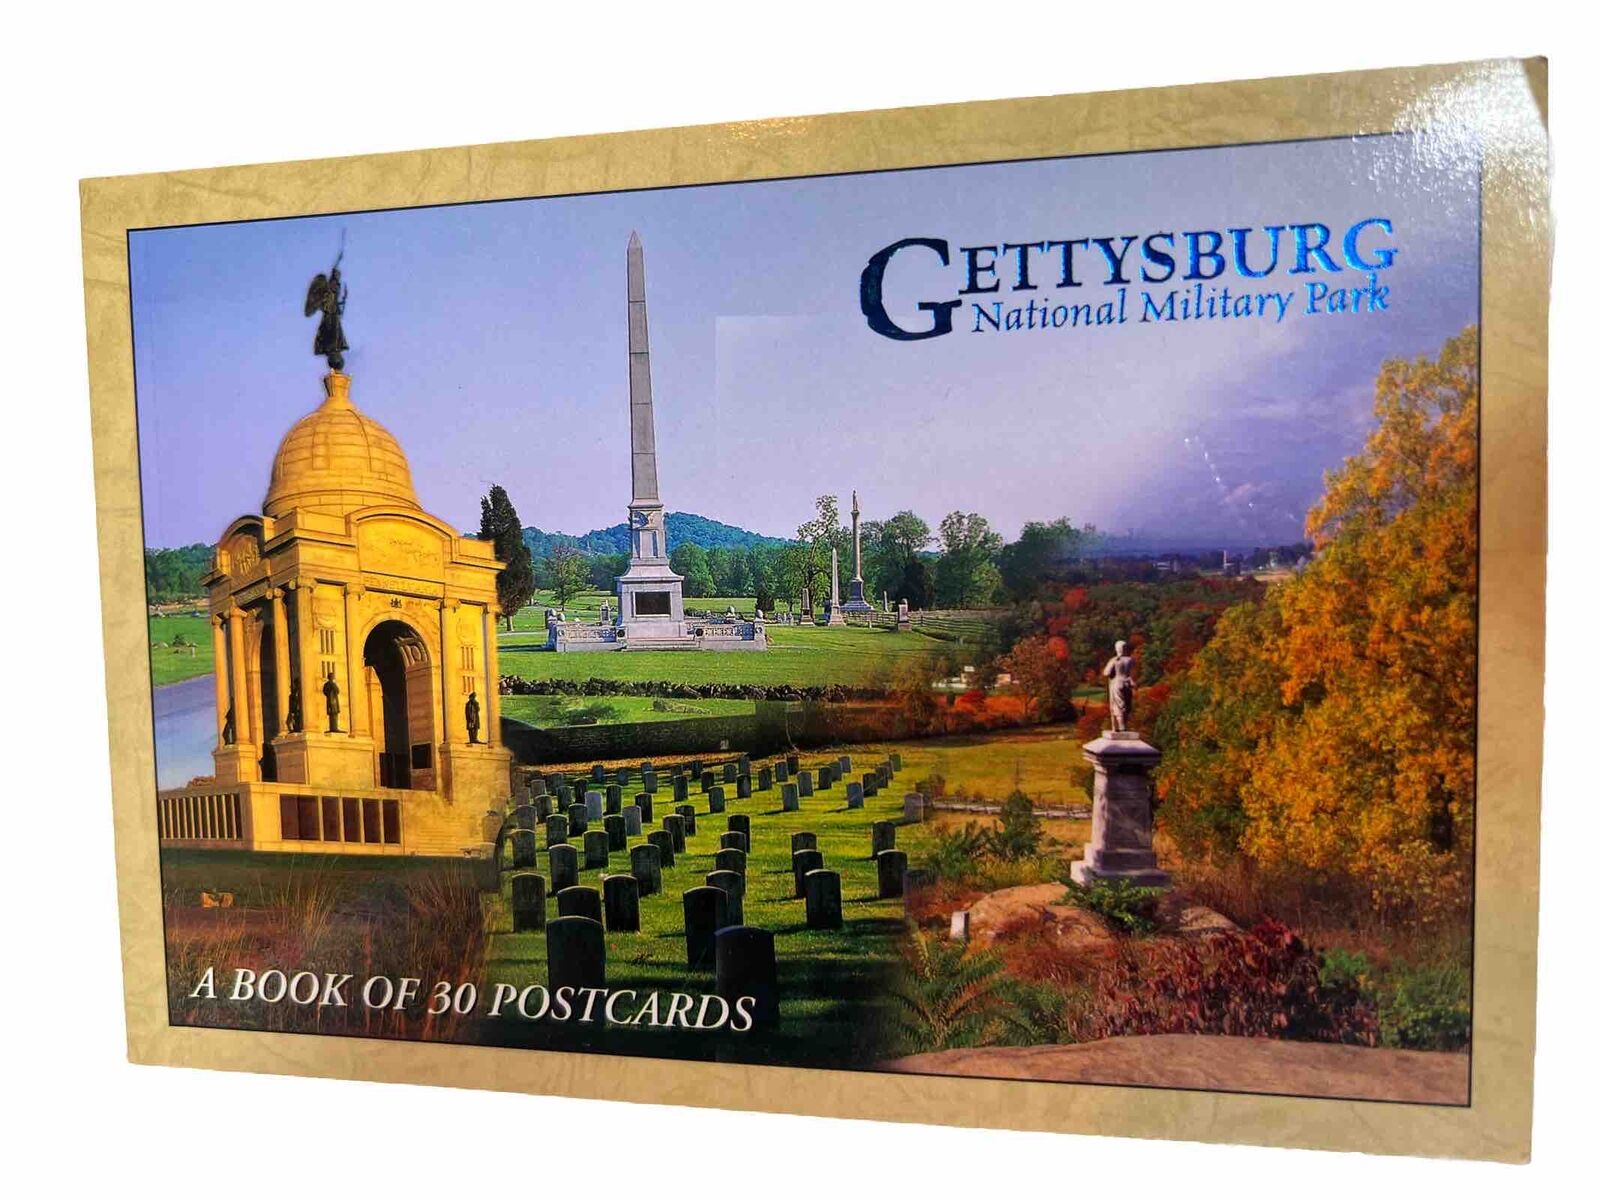 Gettysburg National Military Park Book Of 30 Postcards.